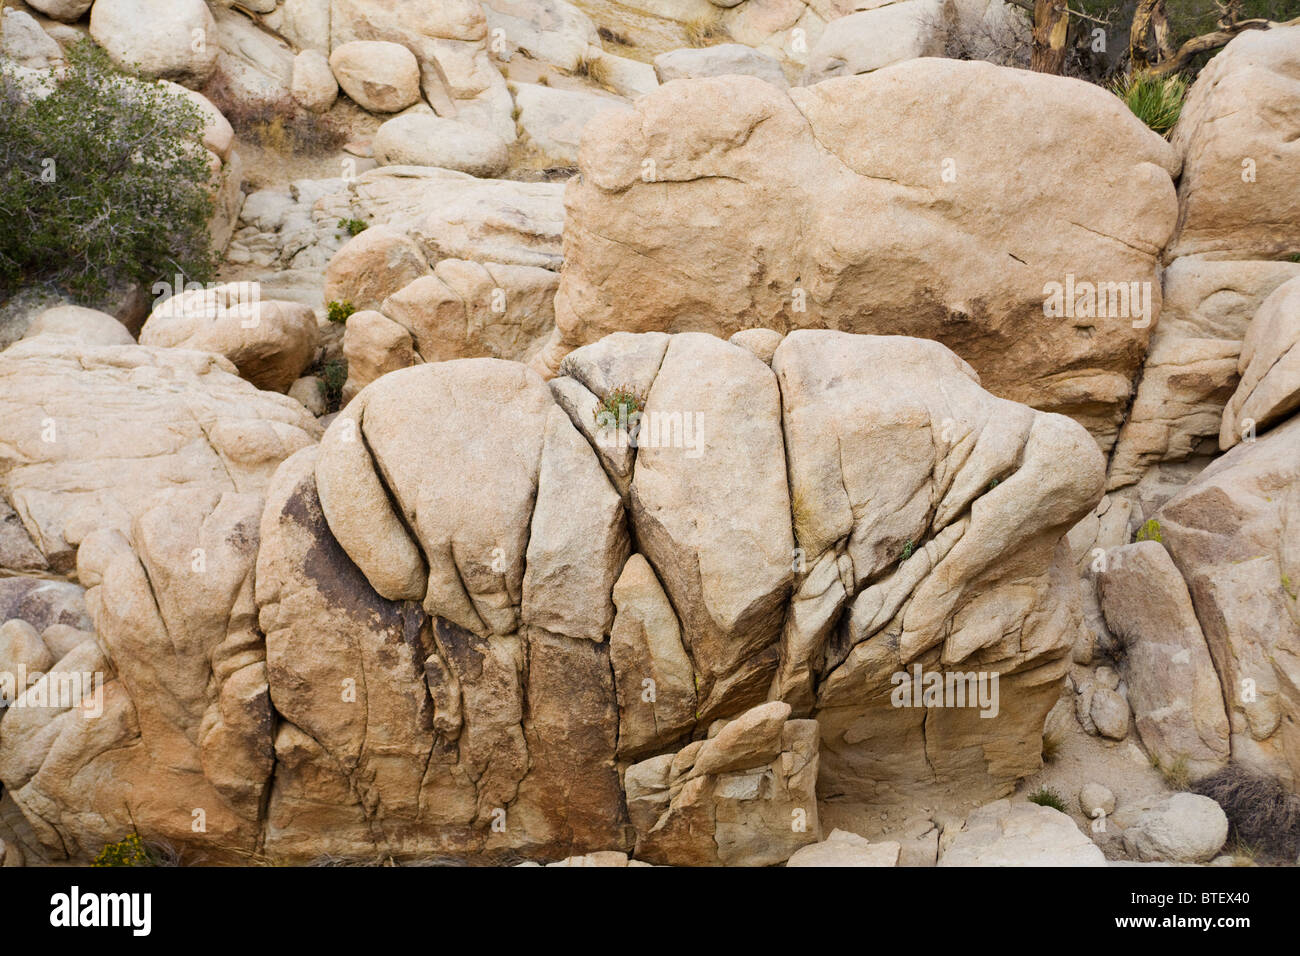 Monzogranite rock formation displaying folds, layers, and joints - California USA Stock Photo